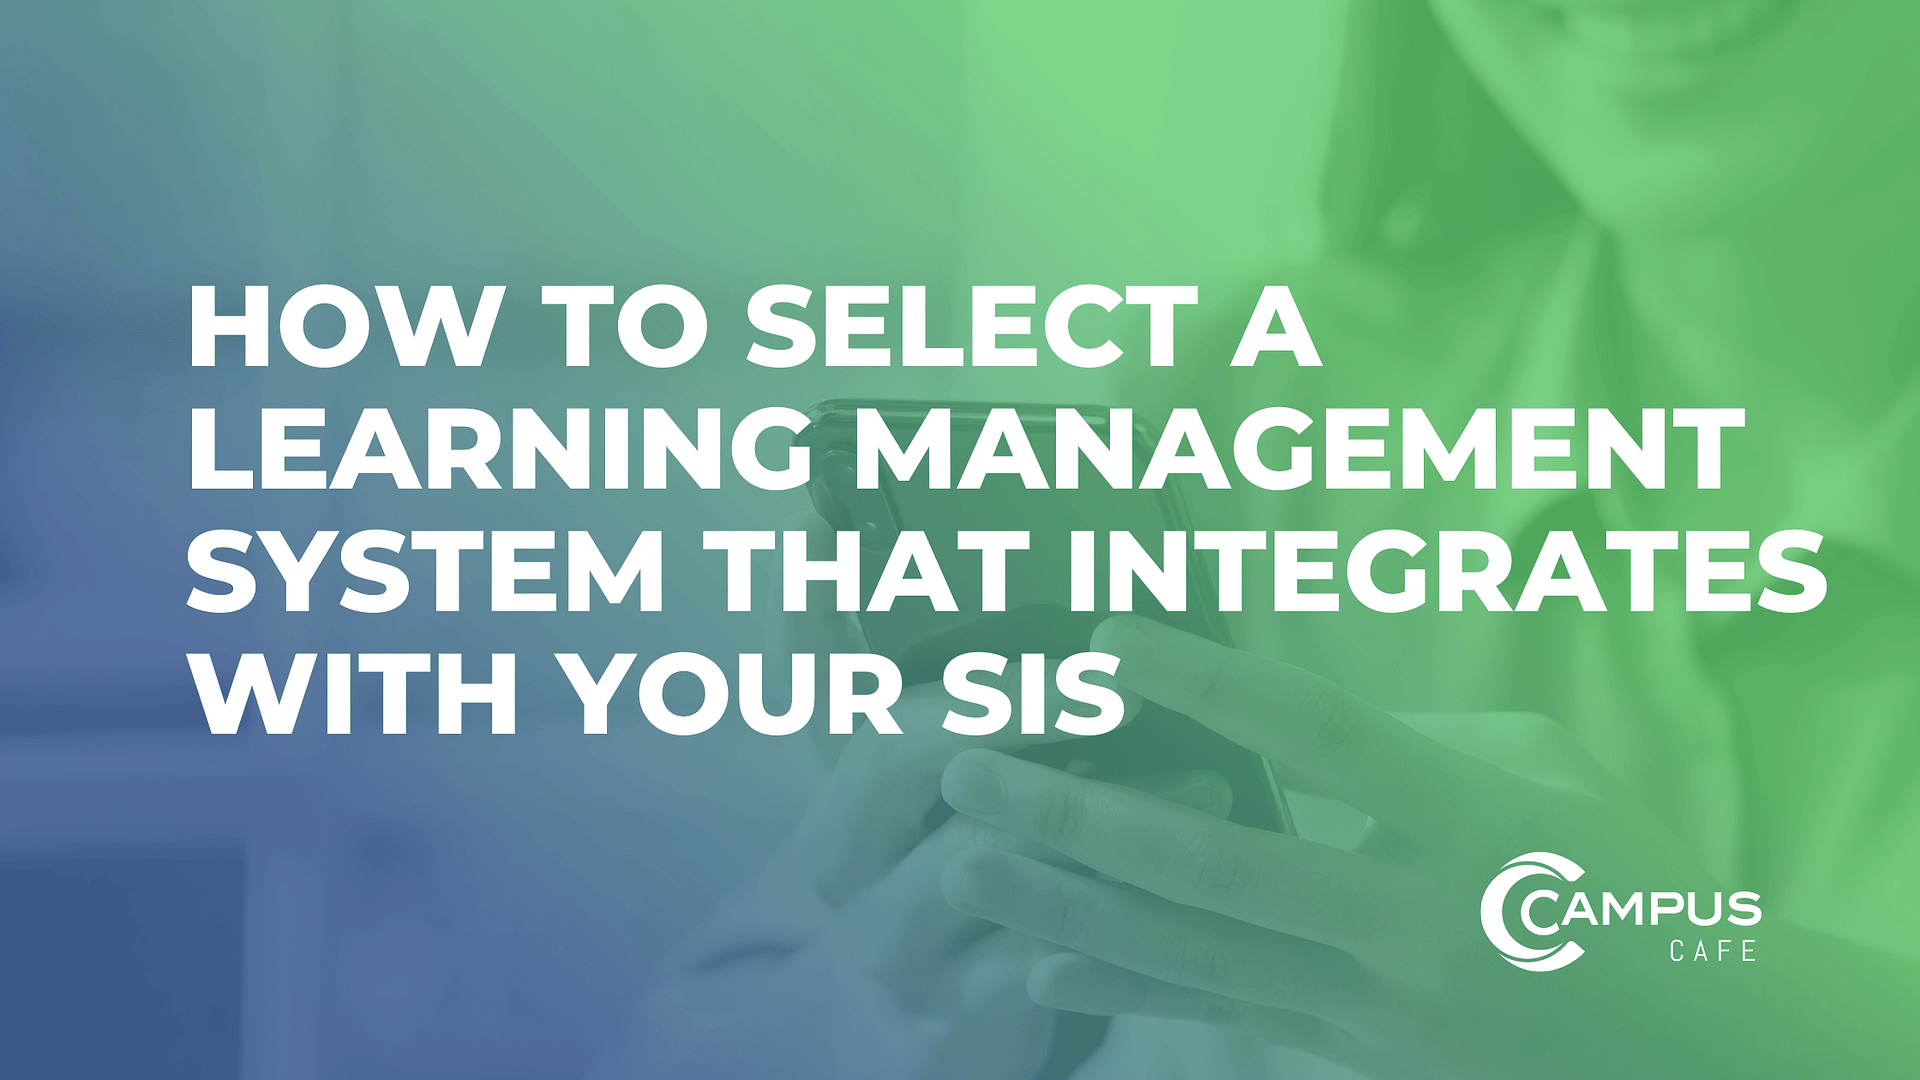 This article will discuss some key considerations and features to help you find the best learning management system to integrate with your student information system to maximize its potential.